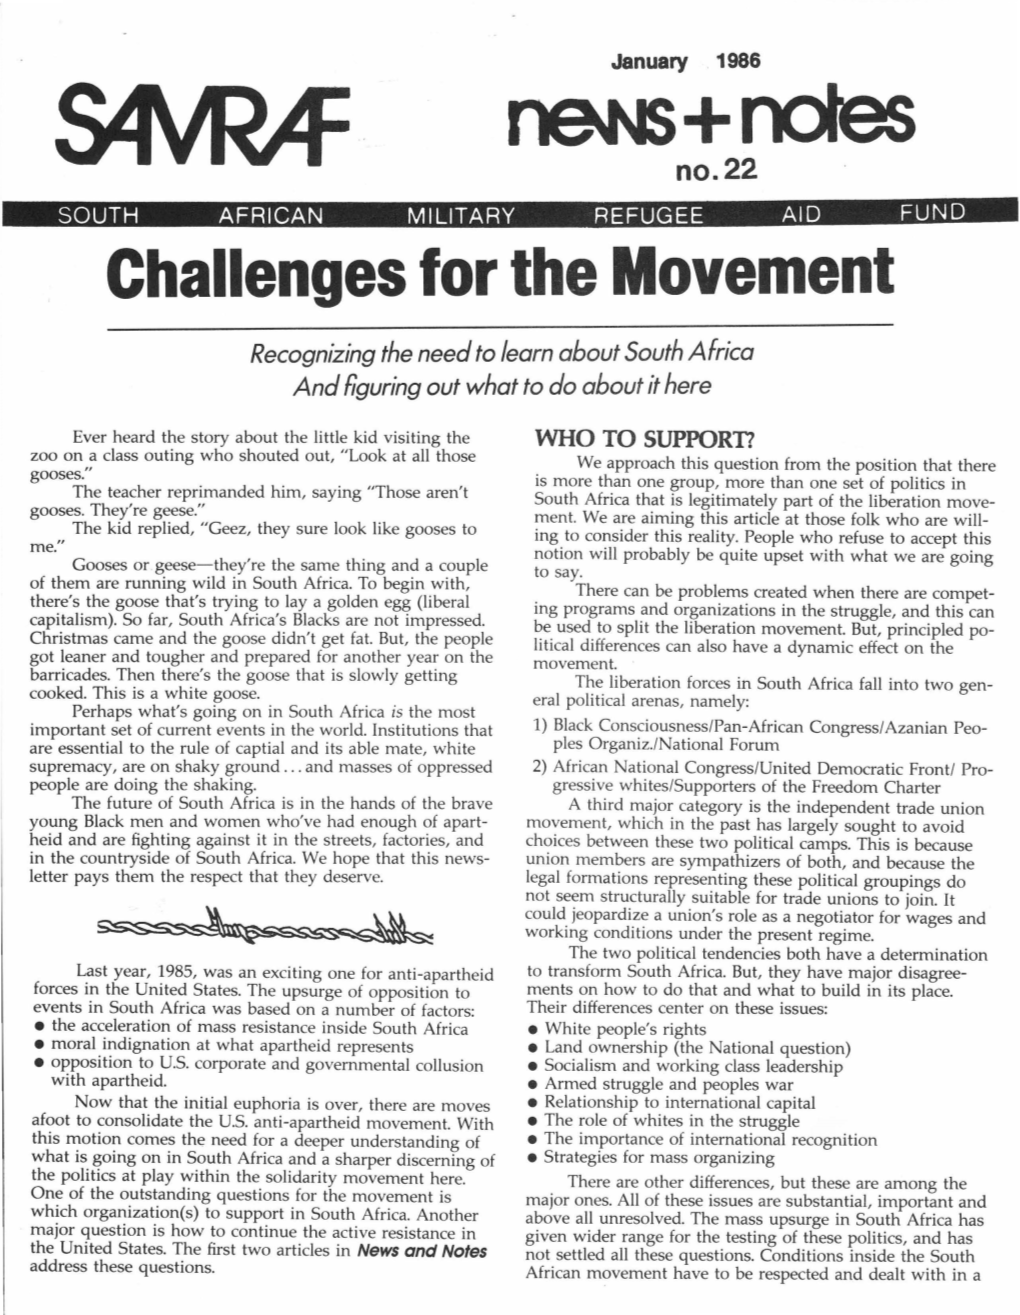 Challenges for the Movement